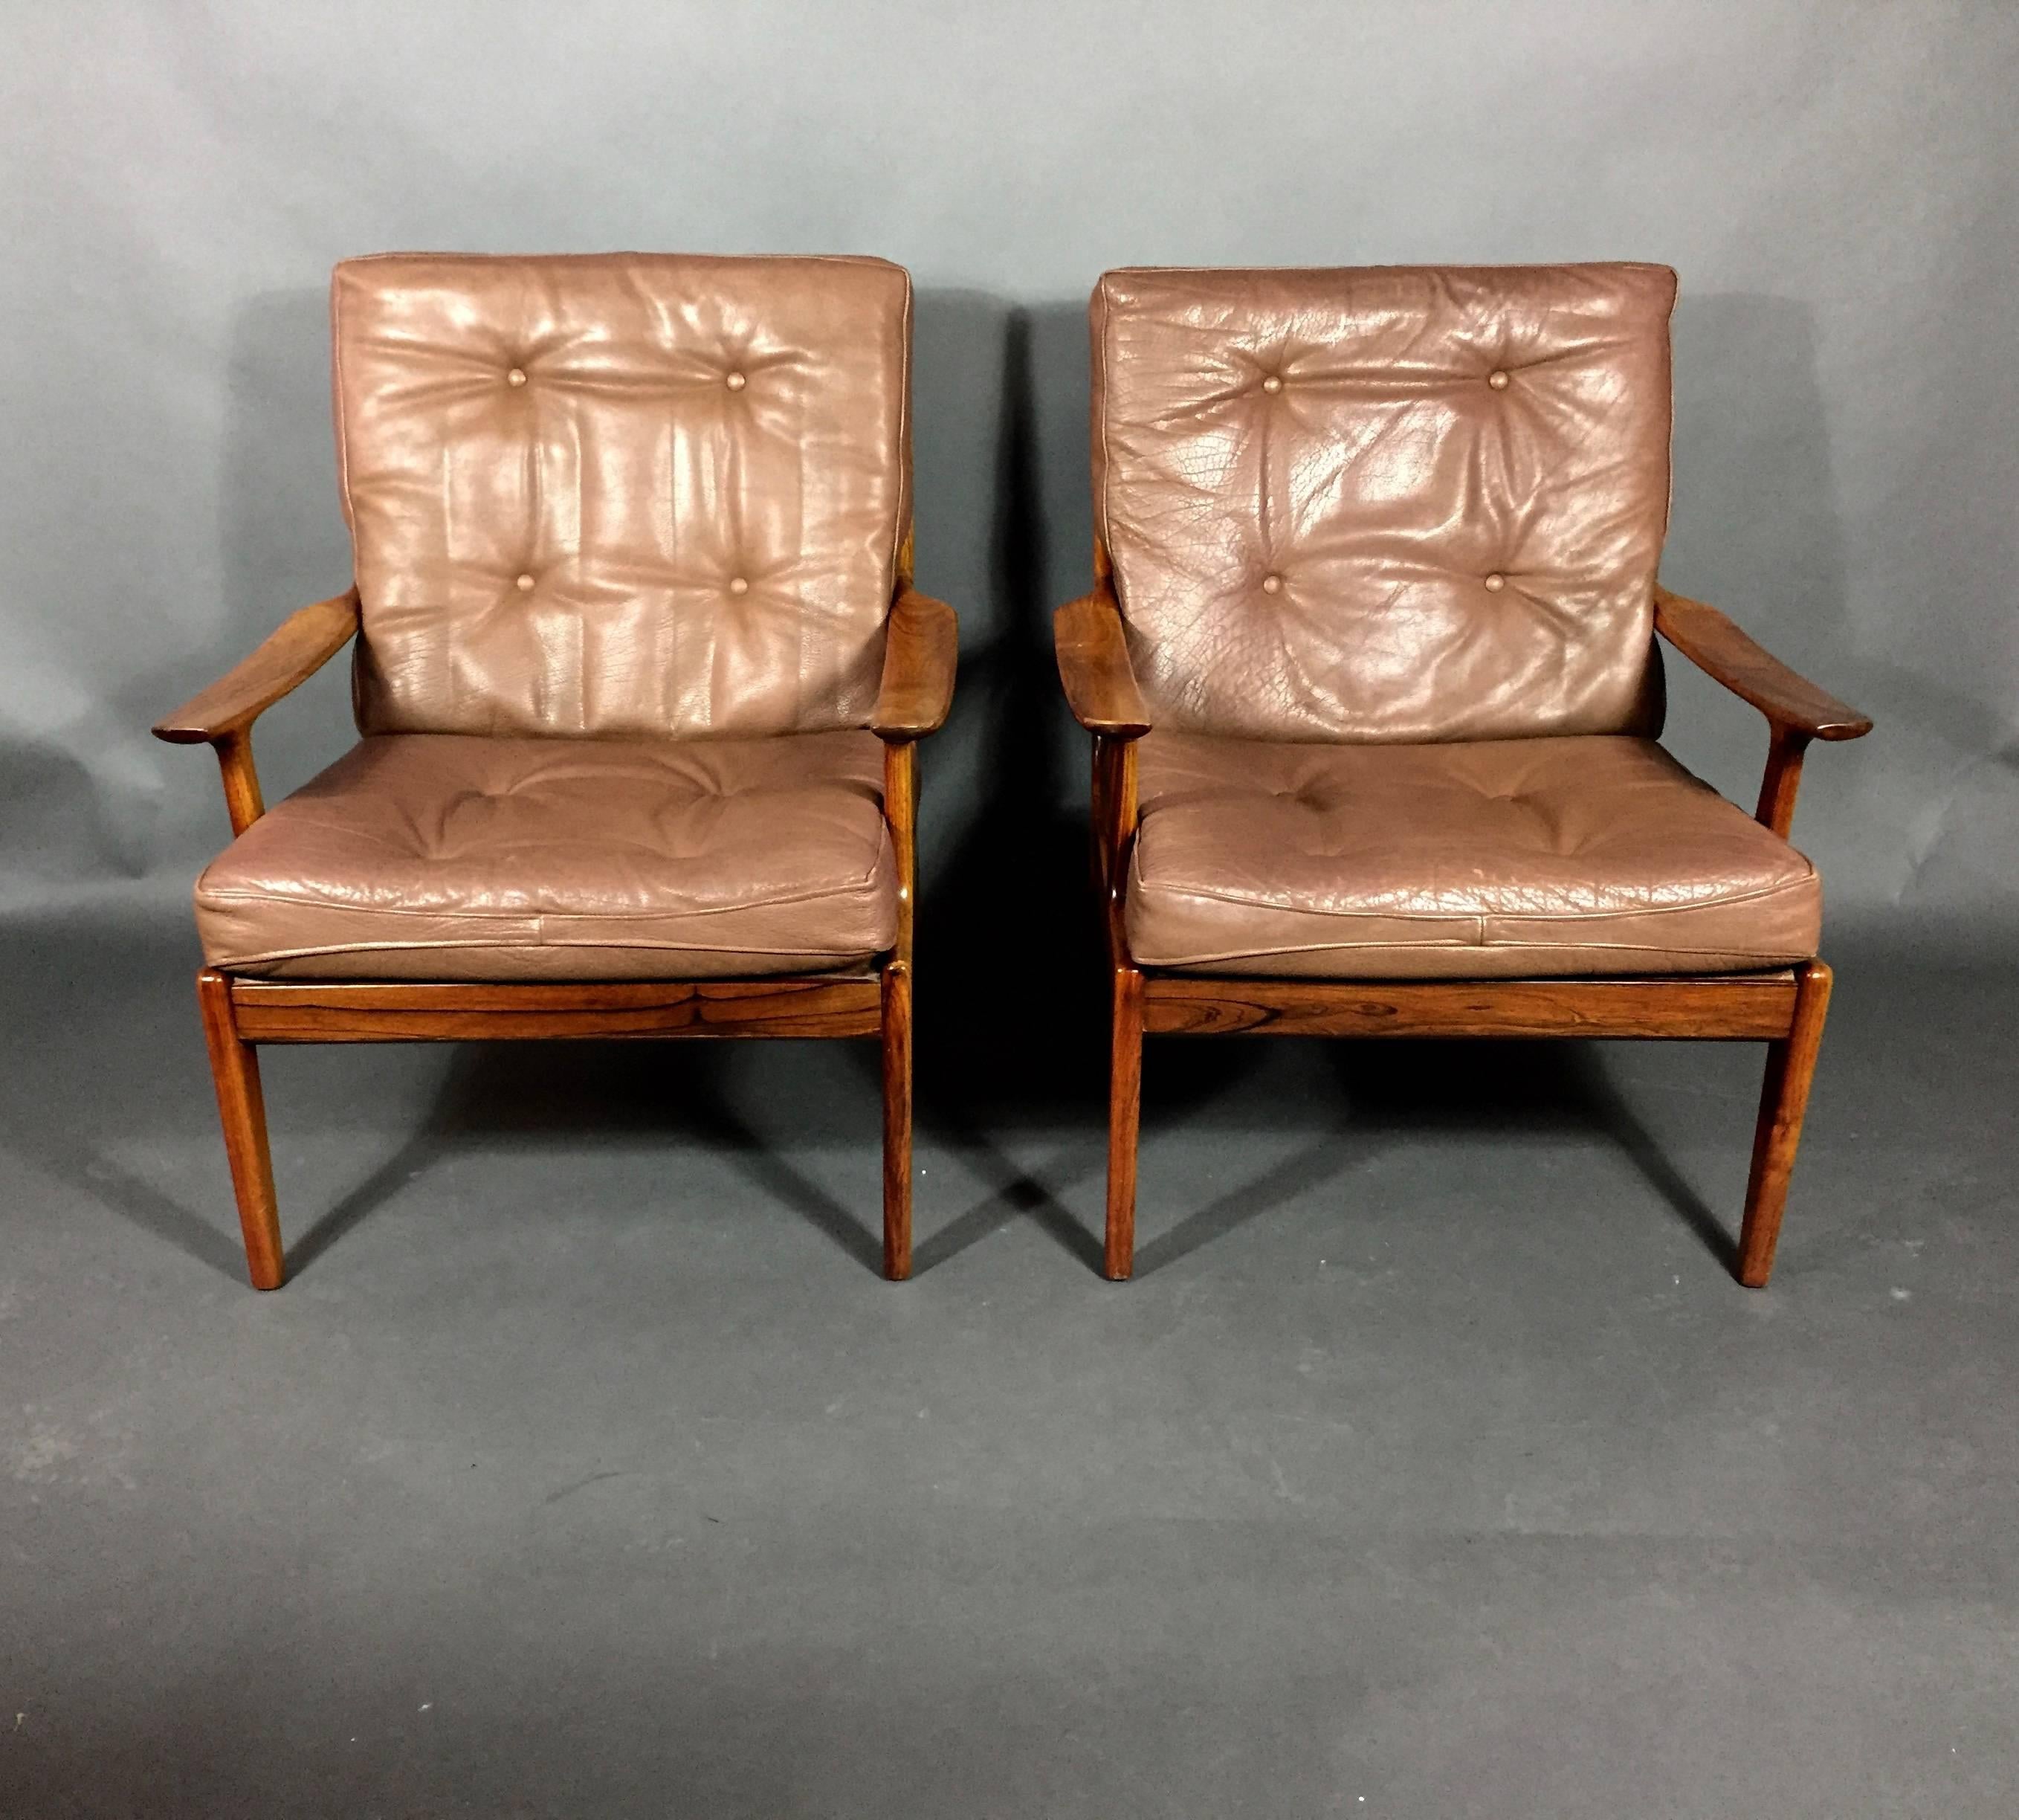 Scandinavian Modern Solid Rosewood and Leather Lounge Chairs, Denmark, circa 1970